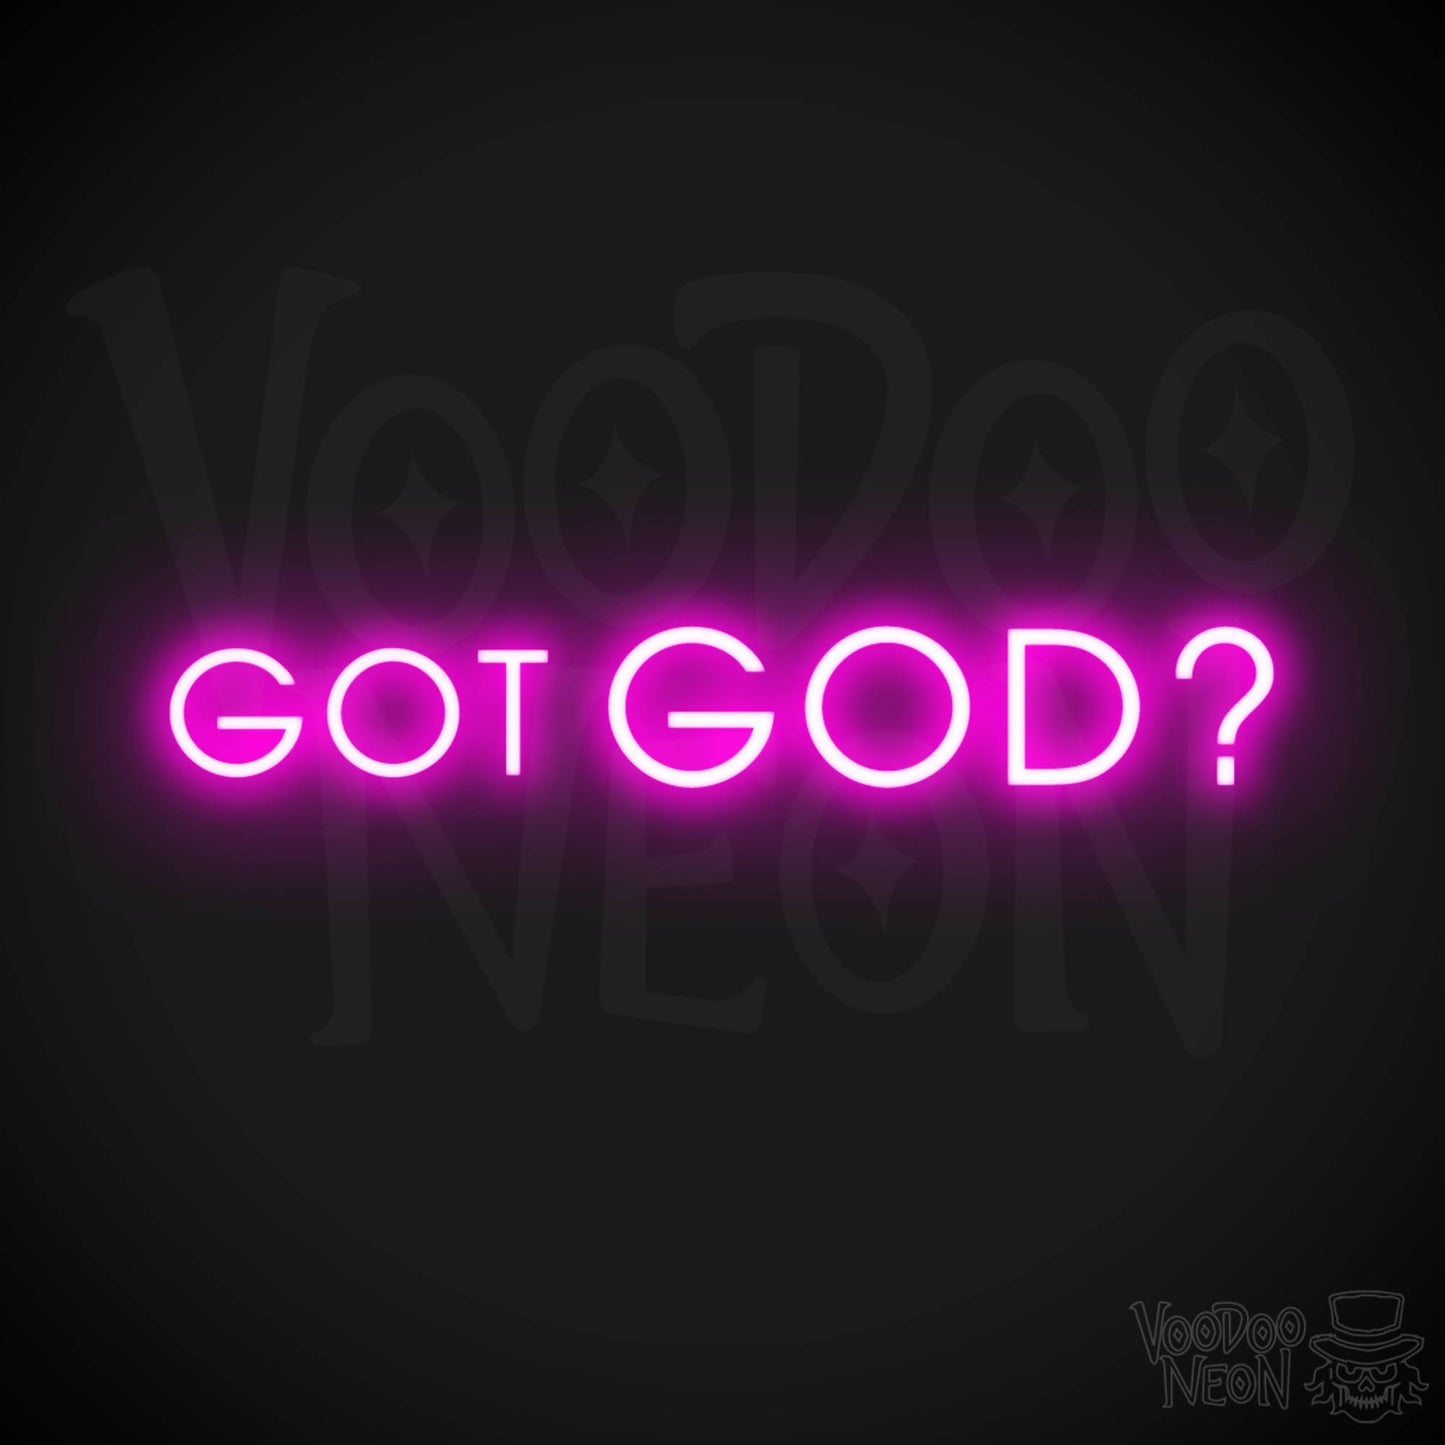 Got God Neon Sign - Neon Got God Sign - Neon God Sign - LED Wall Art - Color Pink